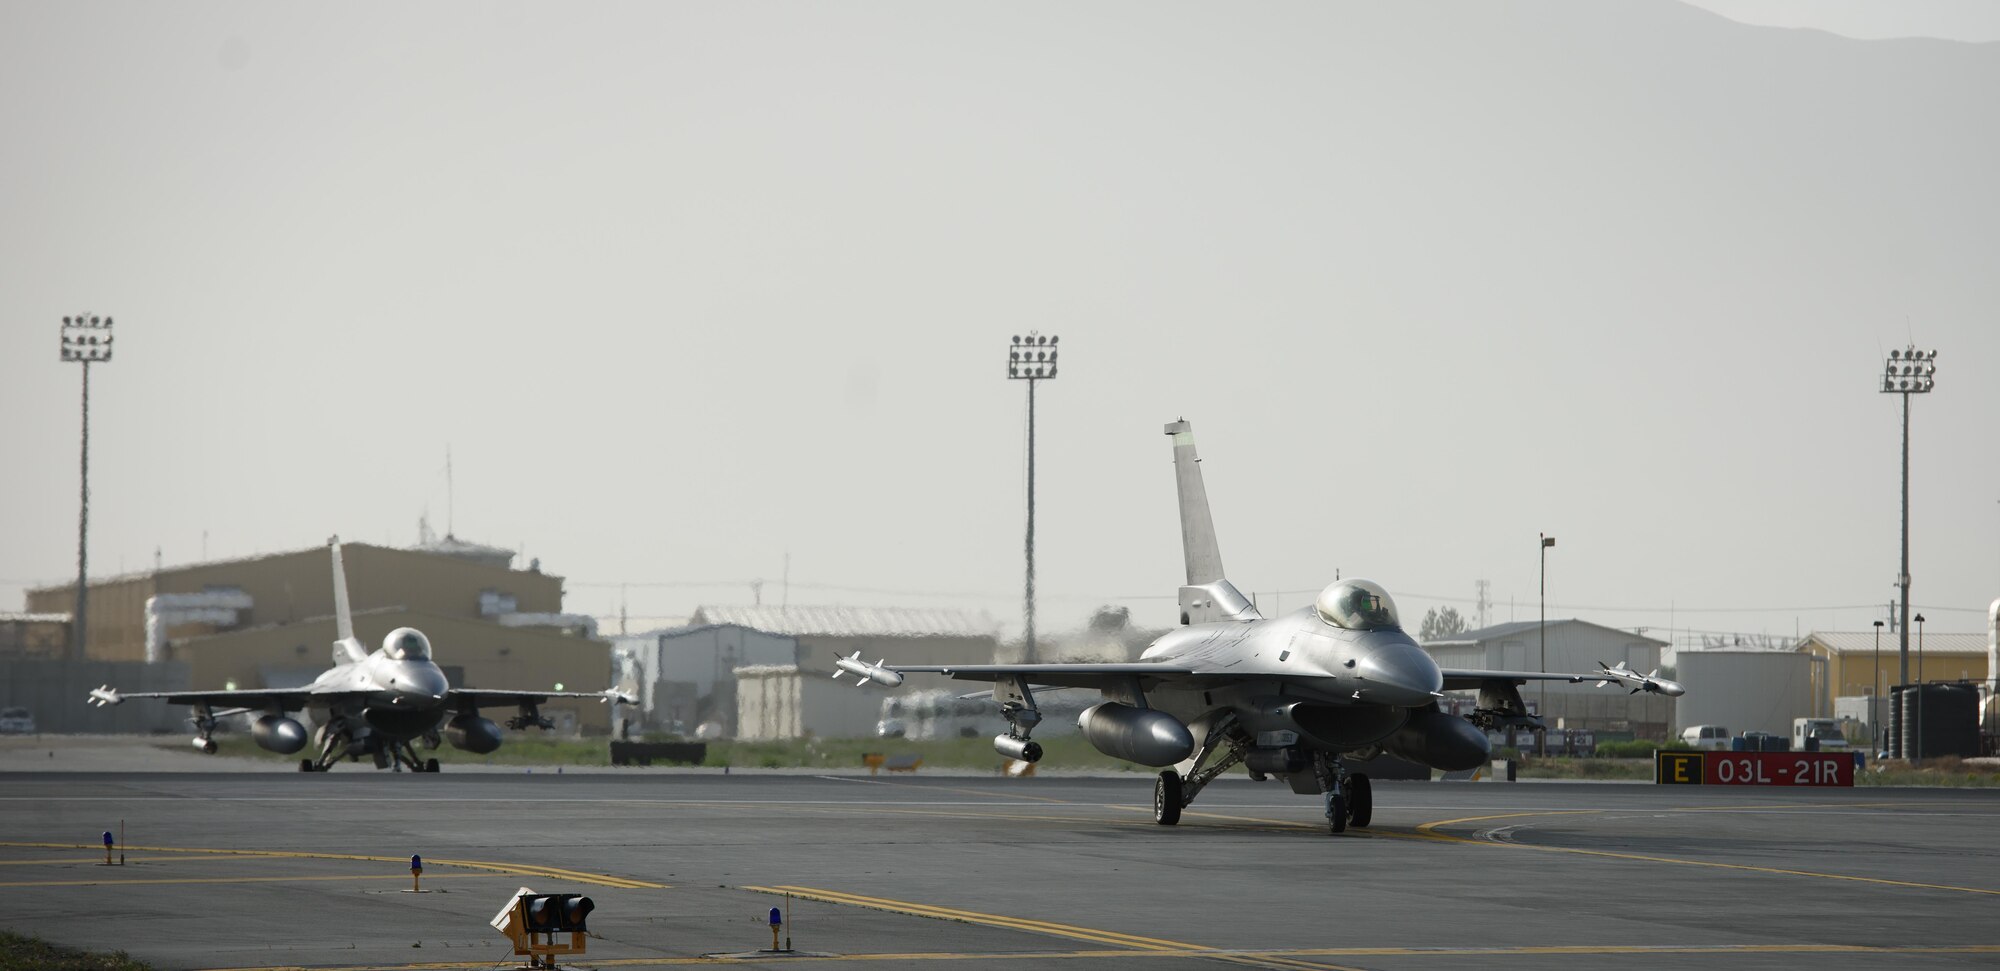 F-16 Fighting Falcons taxi off the runway at Bagram Airfield, Afghanistan, May 19, 2017. F-16s from the 555th Expeditionary Fighter Squadron are deployed out of Aviano Air Base, Italy, as part of a constant rotation of fighter aircraft to Afghanistan. (U.S. Air Force photo by Staff Sgt. Benjamin Gonsier)